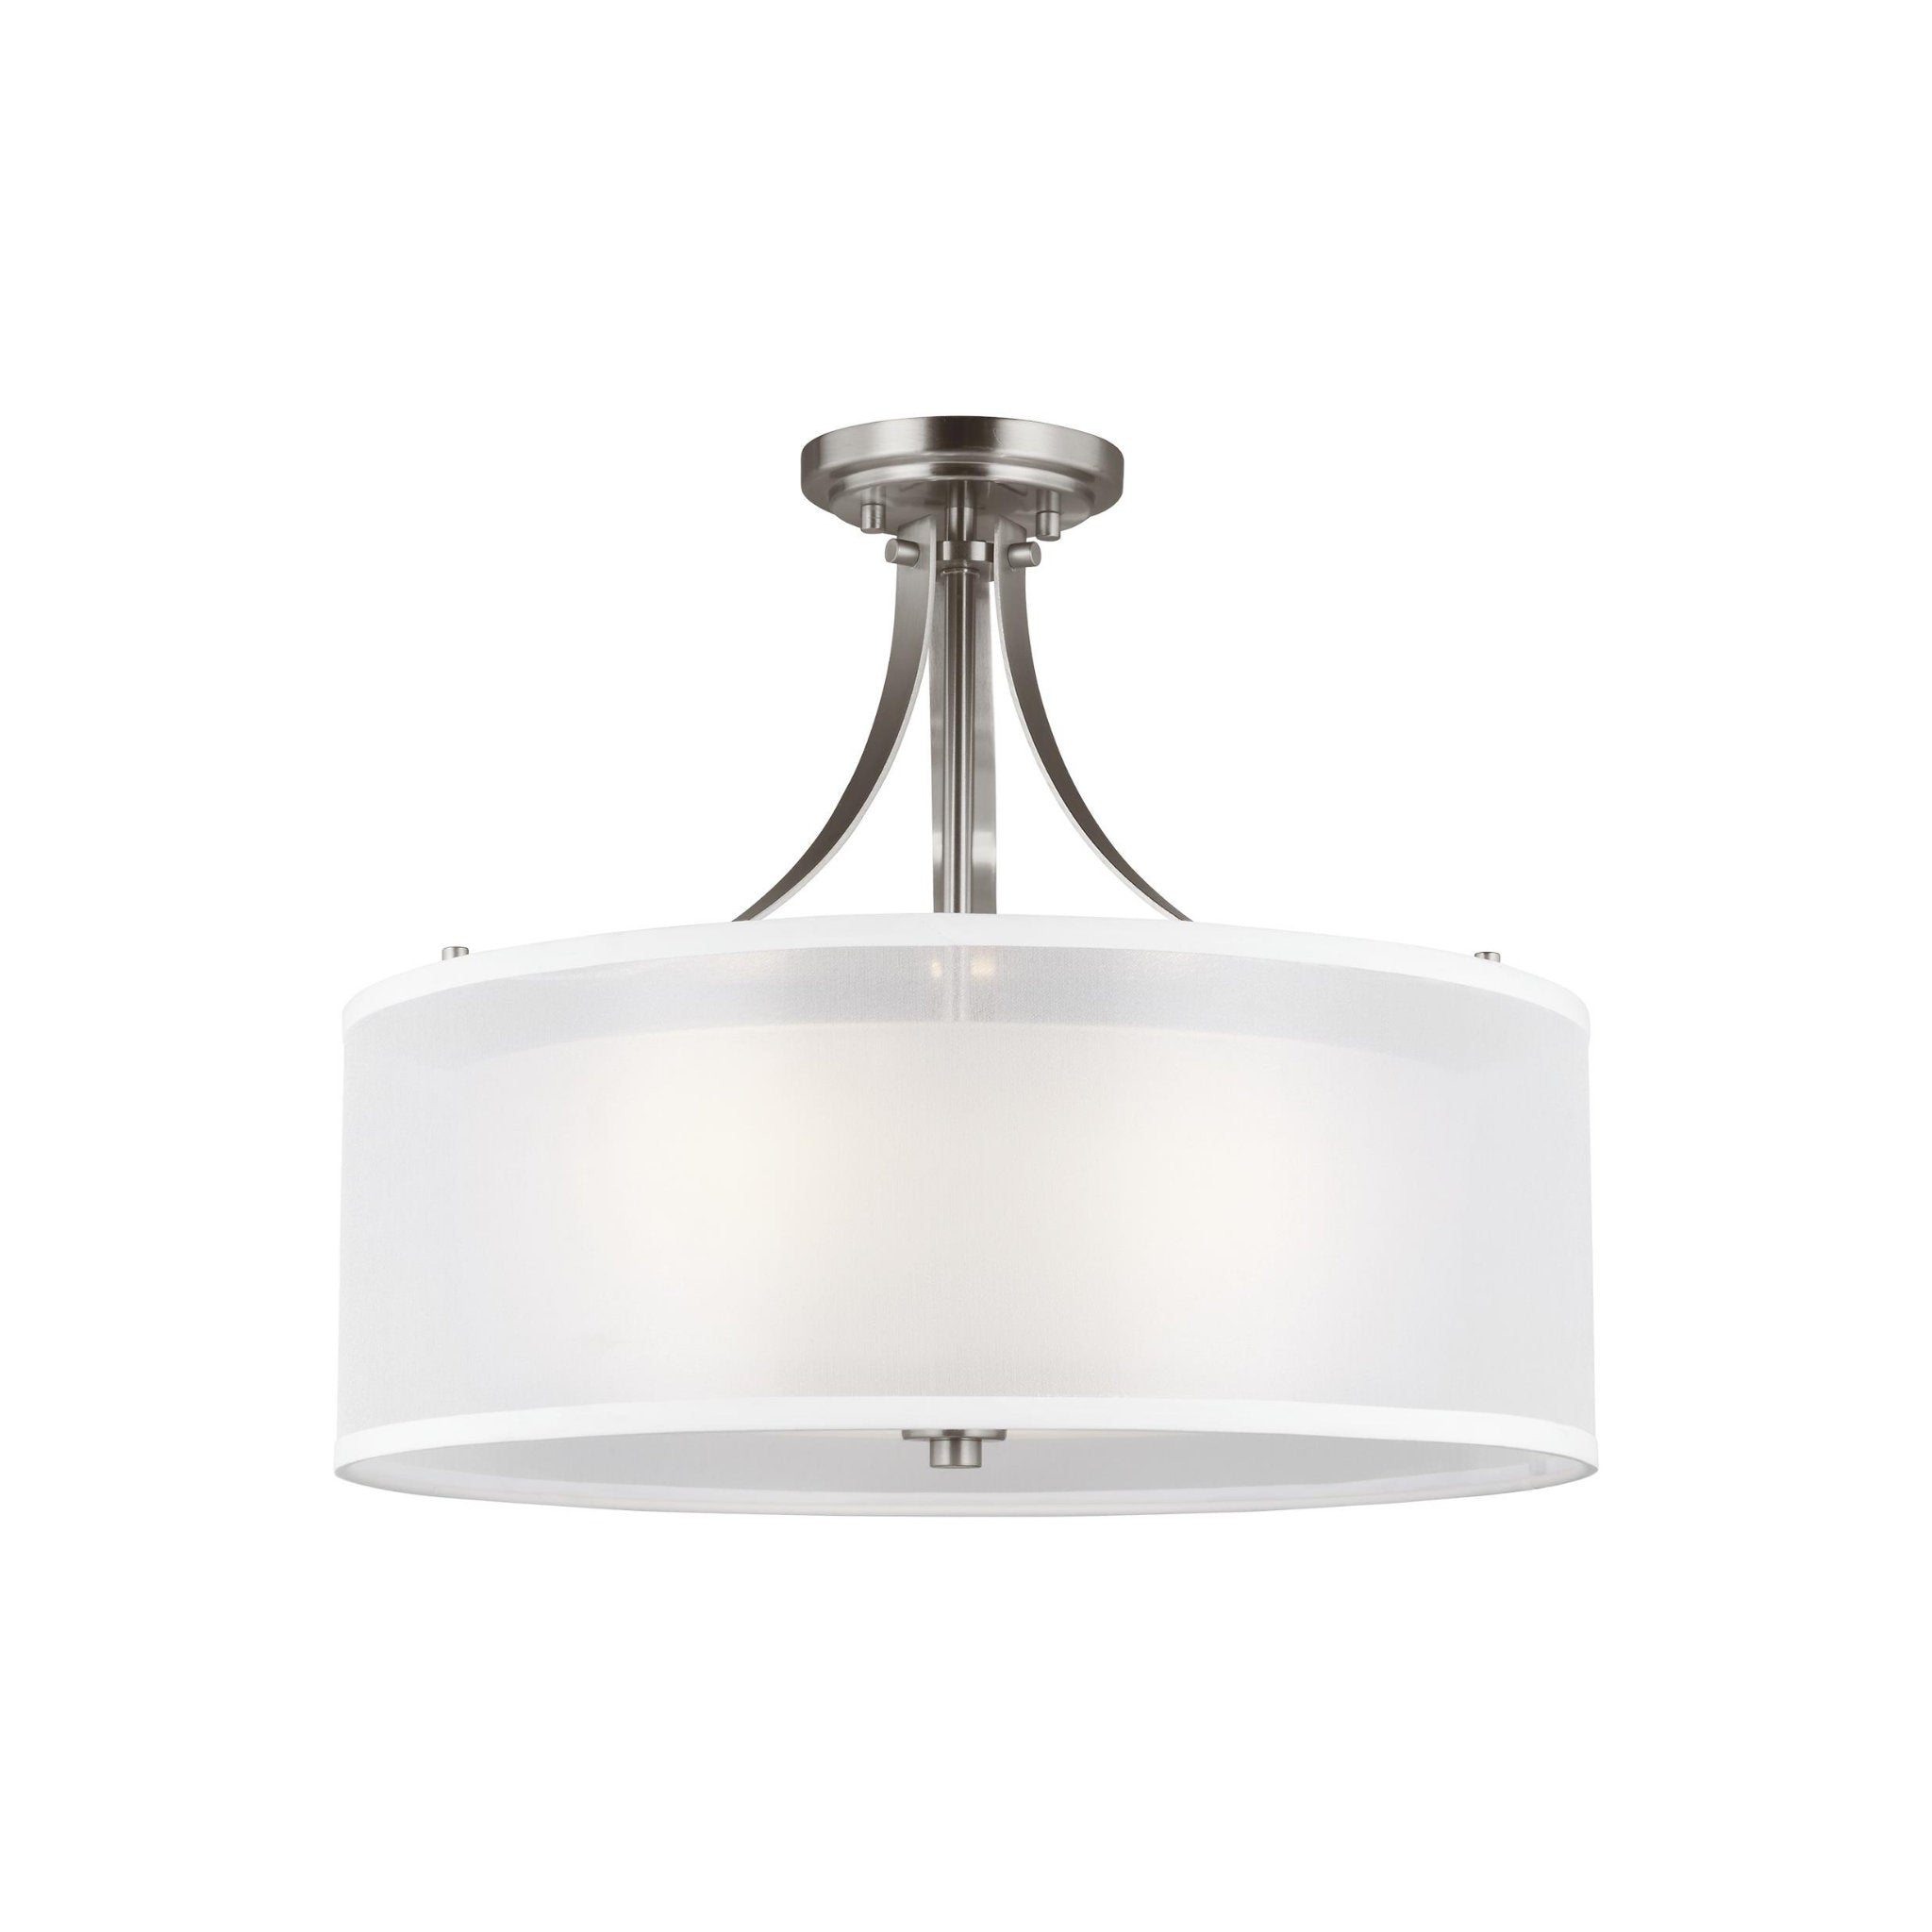 Elmwood Park Three Light Semi-Flush Mount Traditional Ceiling Fixture 15.75" Height Steel Round Satin Etched Shade in Brushed Nickel